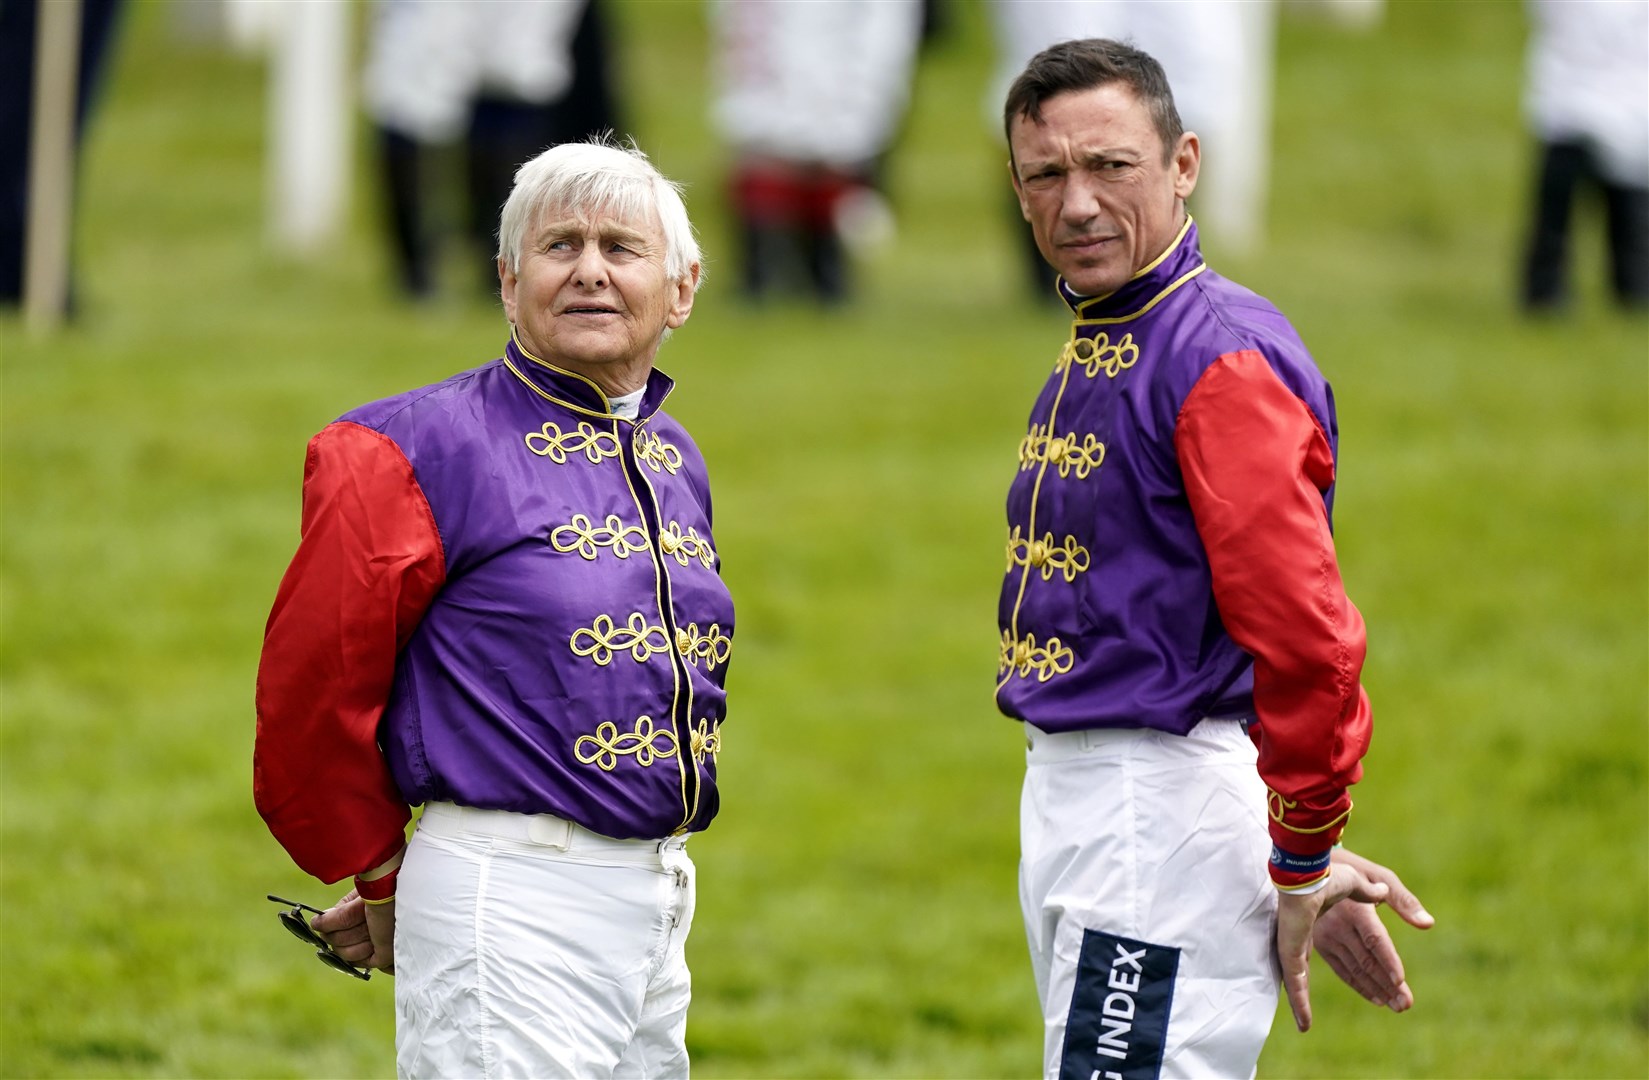 The line-up including champion jockeys Willie Carson (left) and Frankie Dettori (Andrew Matthews/PA)